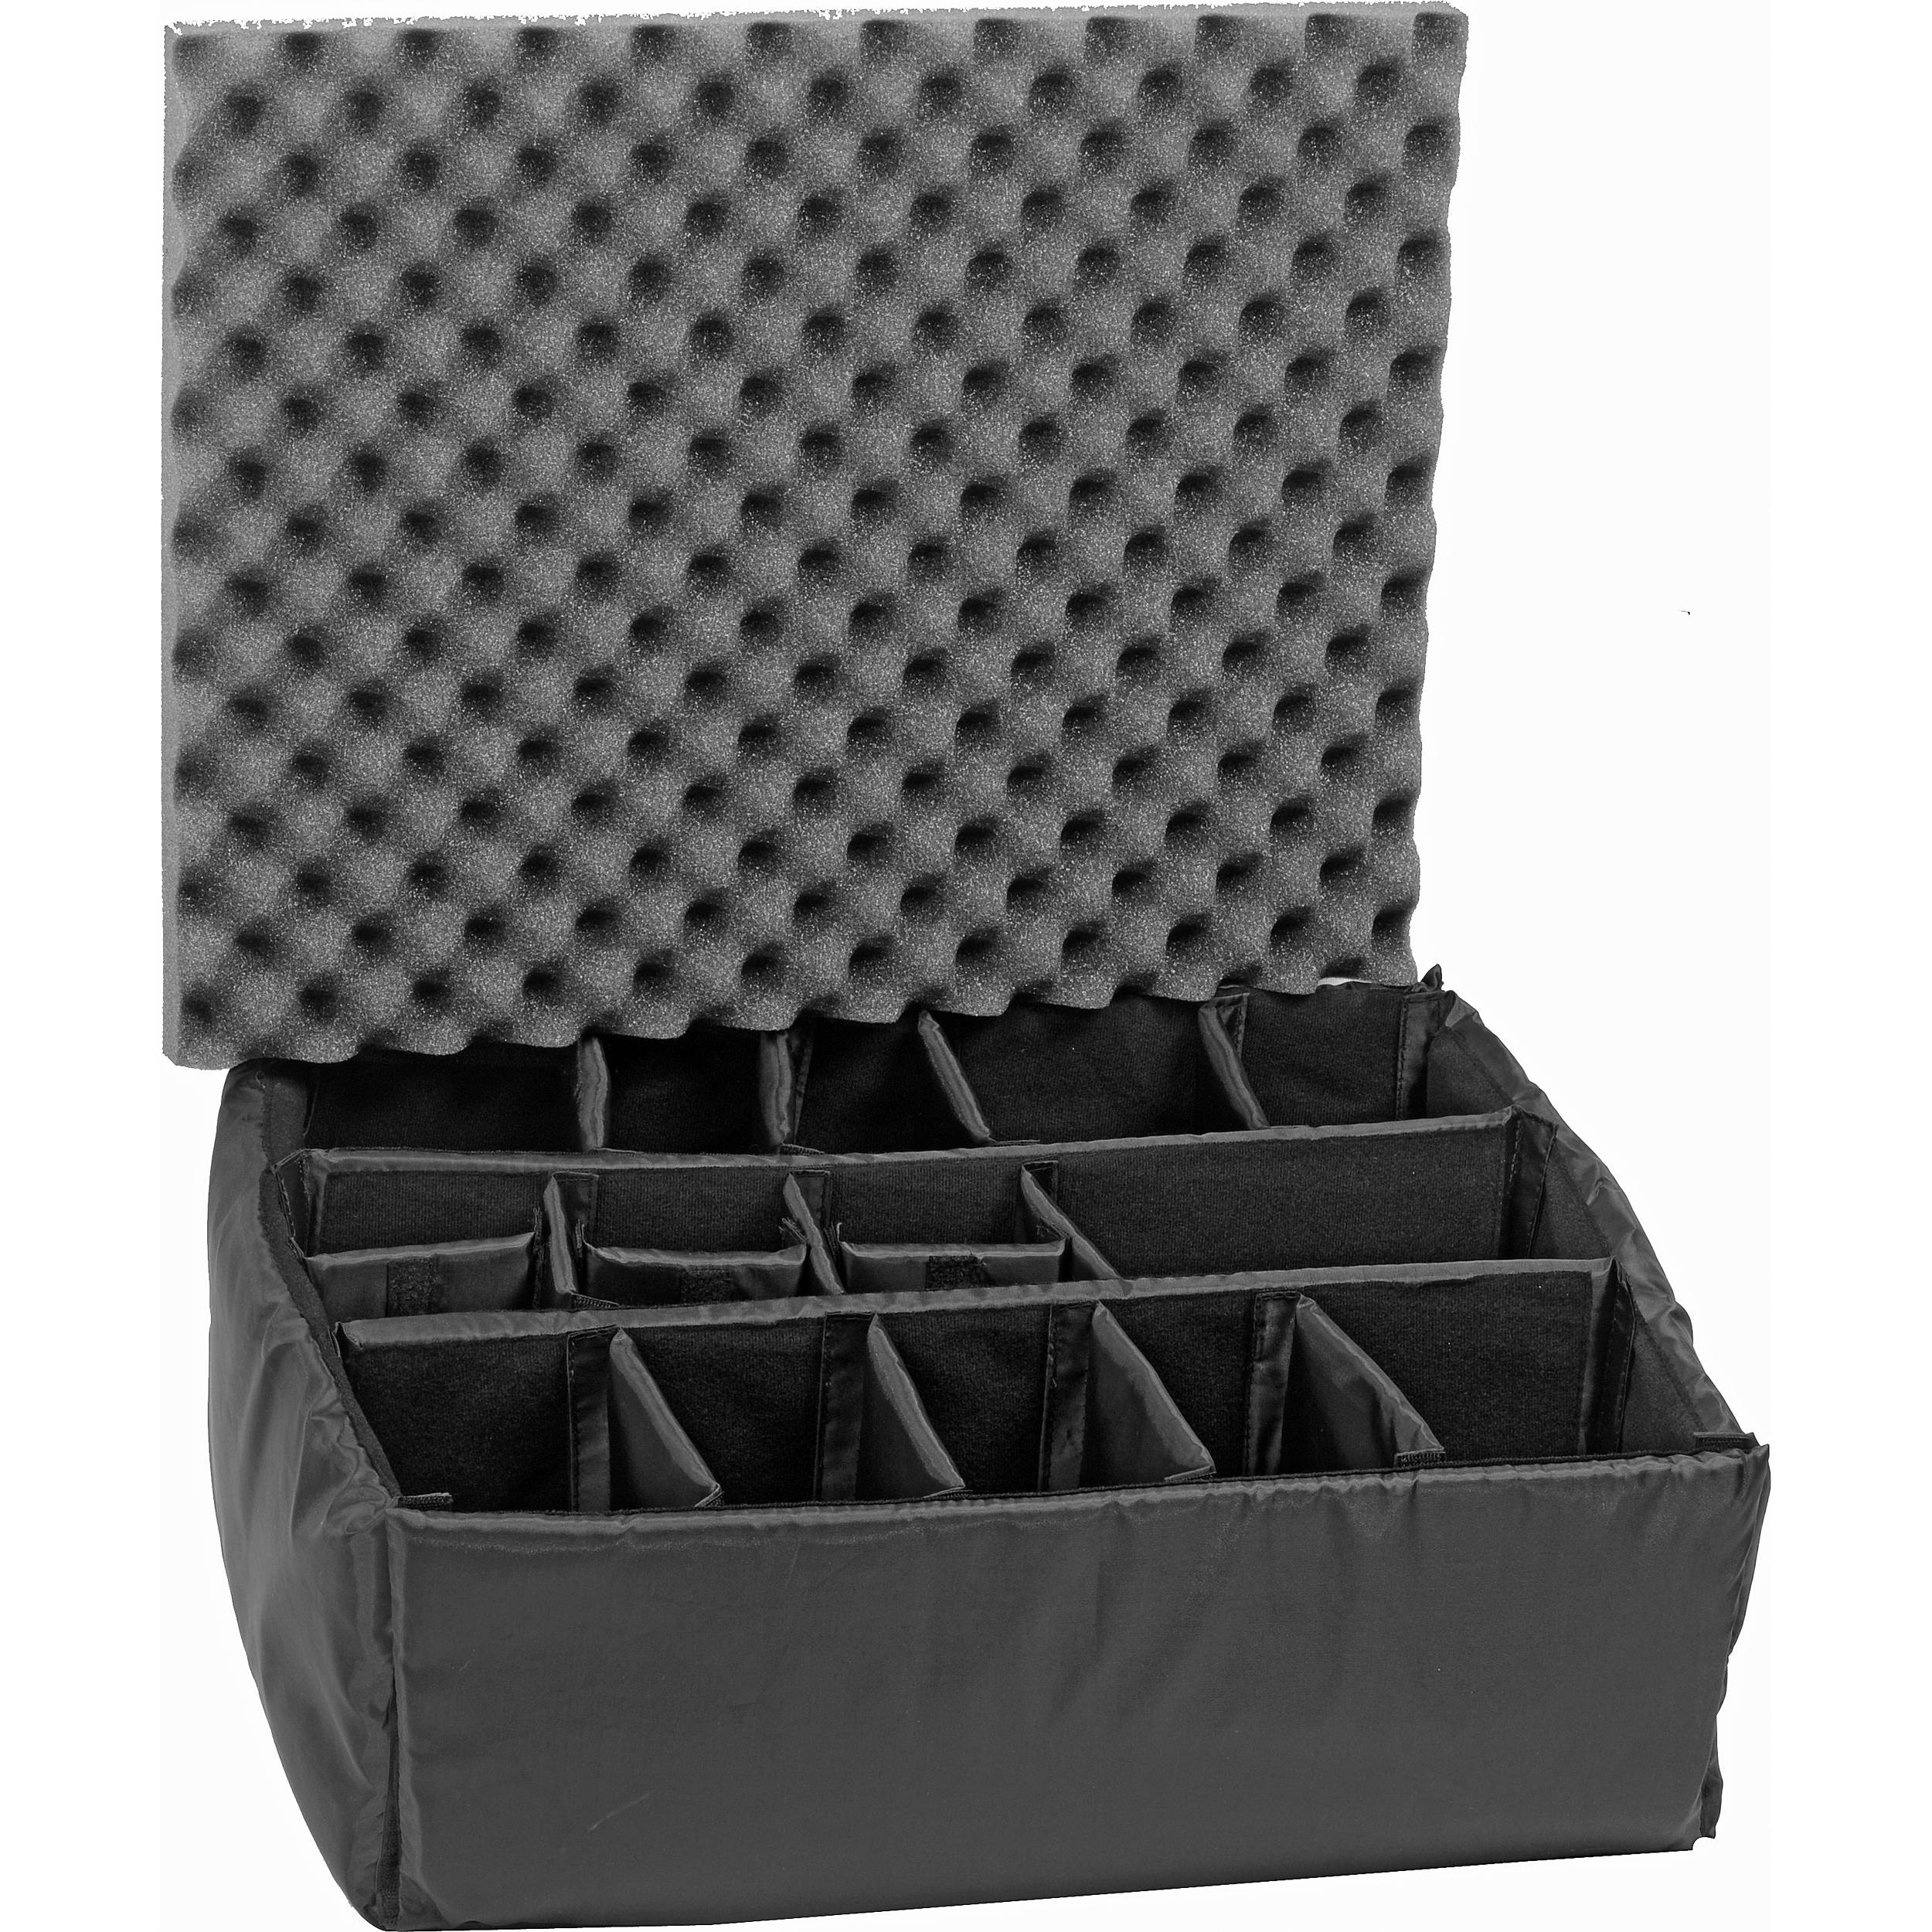 Pelican 1615 Padded Divider Set for Pelican 1610 cases